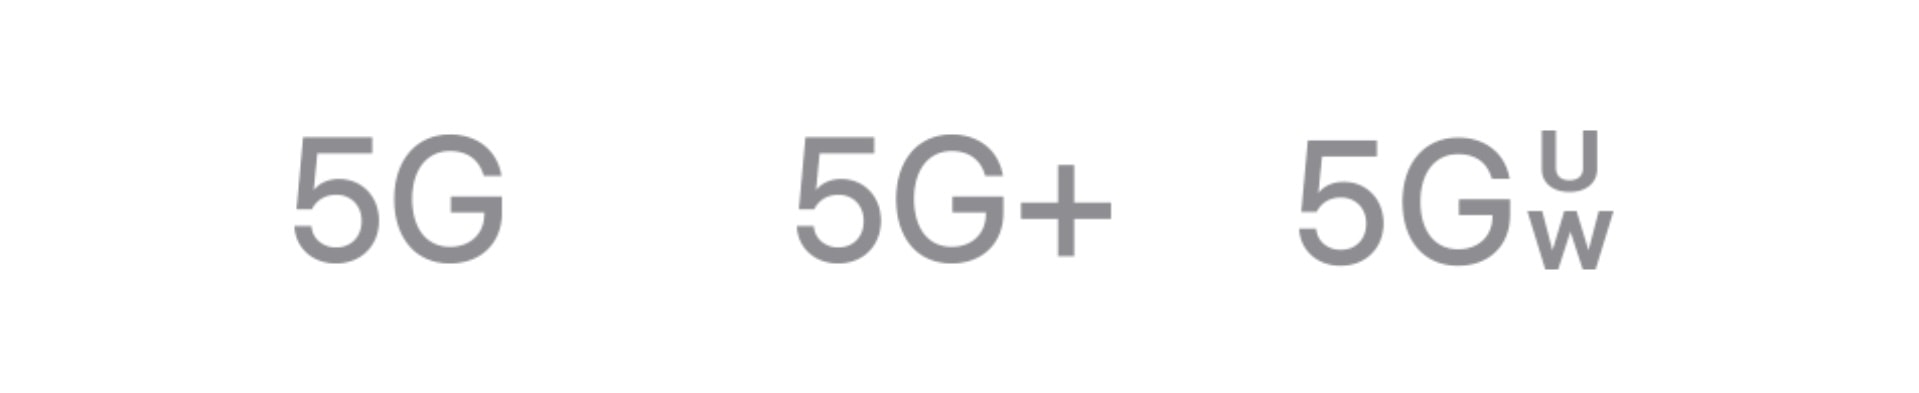 Understand 5G icons on iPhone 12